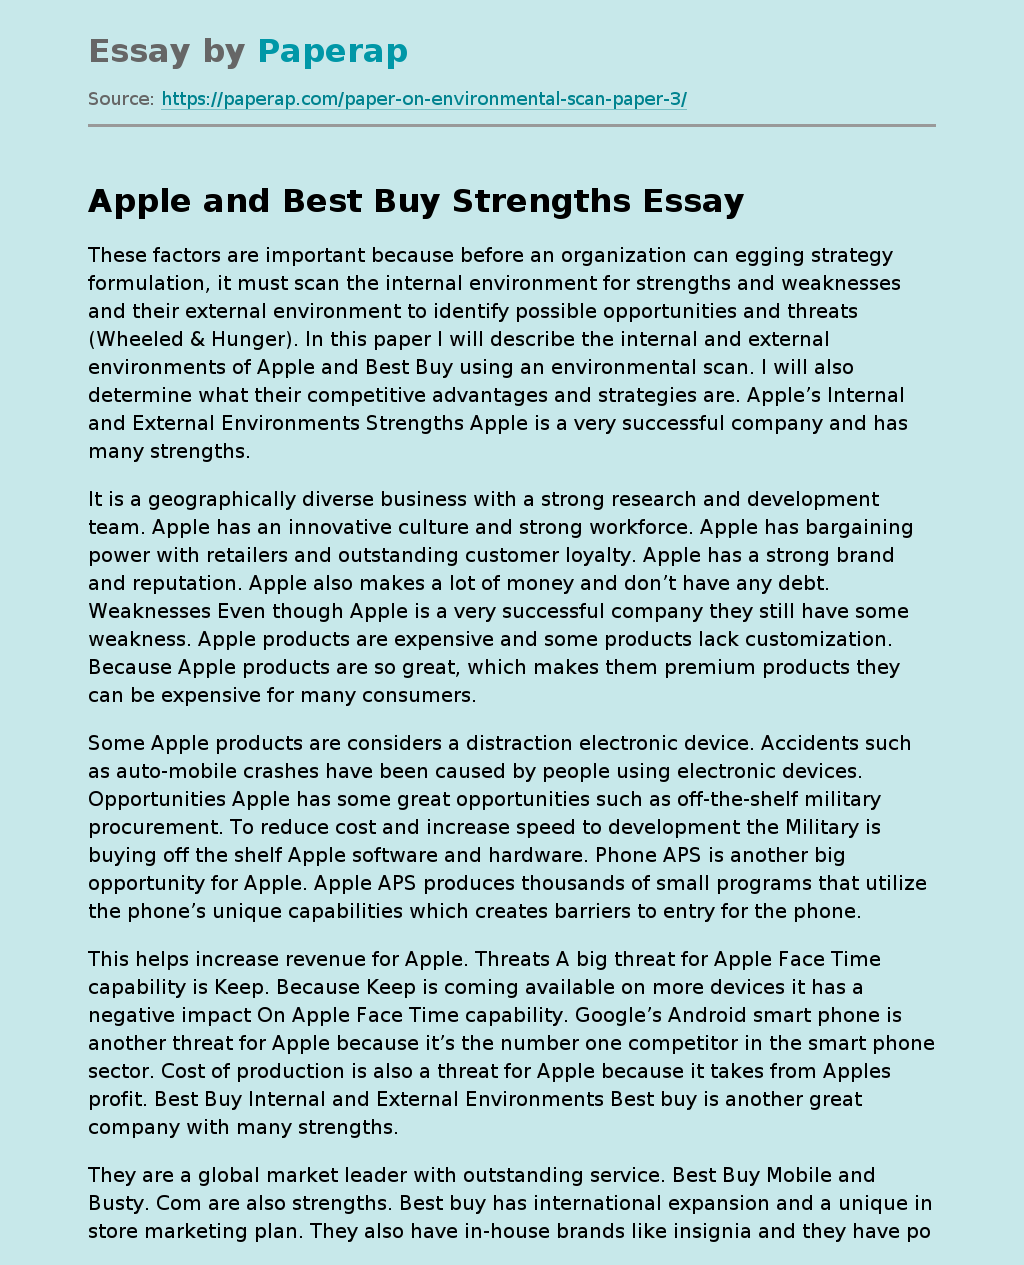 Apple and Best Buy Strengths